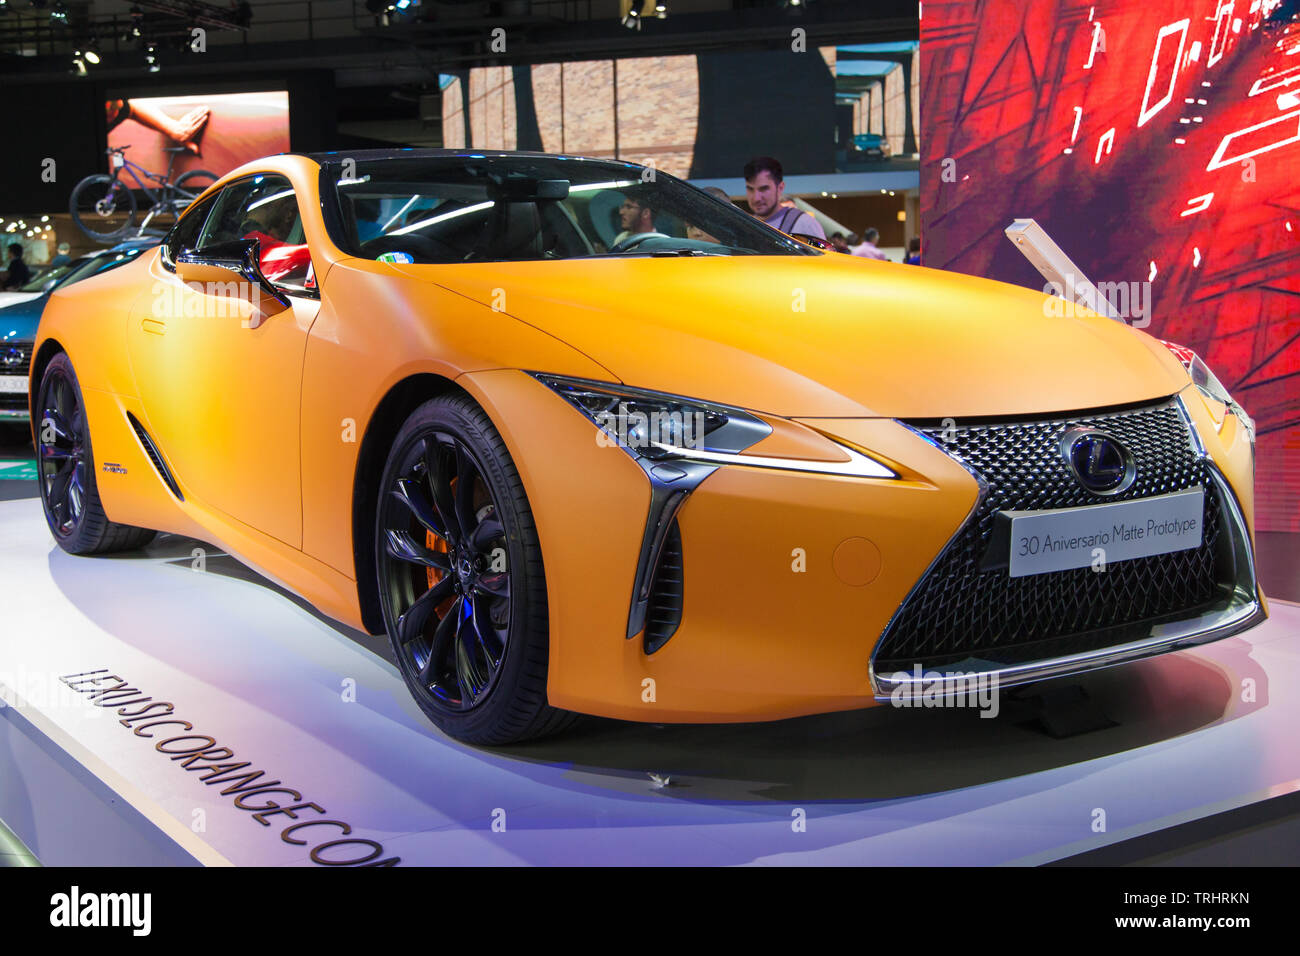 Barcelona, Spain - May 19, 2019: Lexus LC 500h Matte Prototype showcased at Automobile Barcelona 2019 in Barcelona, Spain. Stock Photo